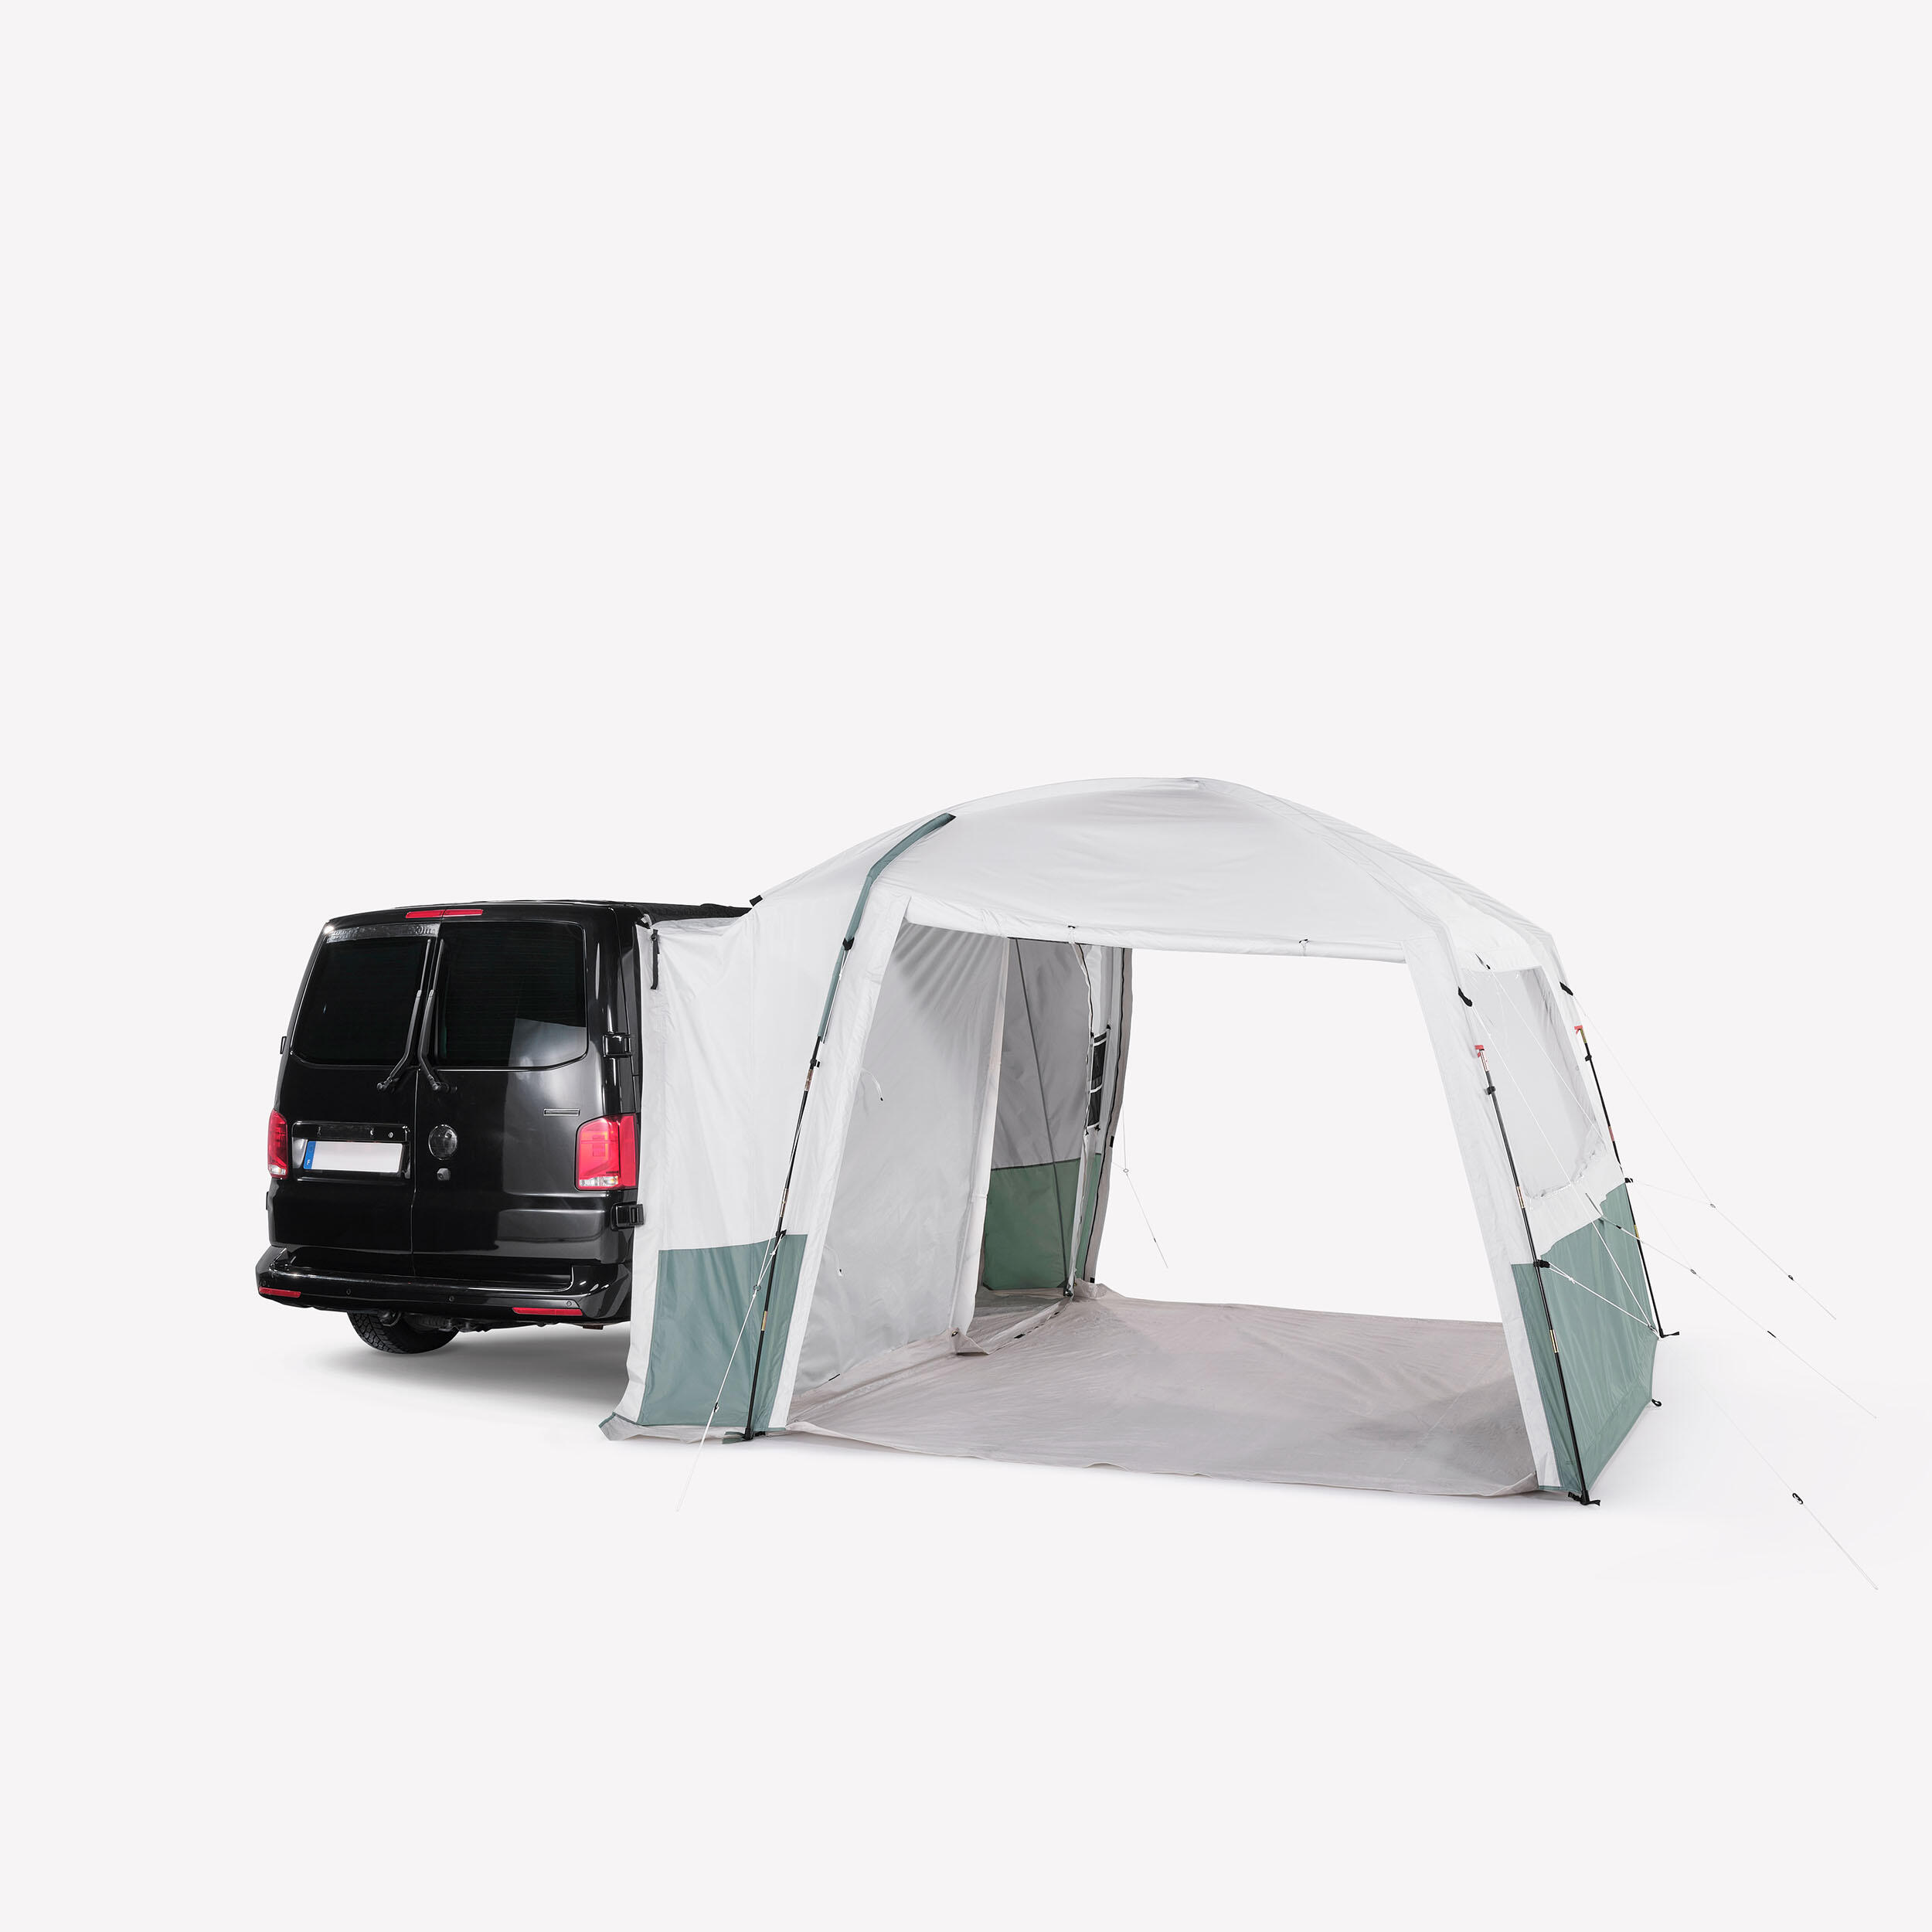 Pole awning for vans and trucks - Van Connect Arpenaz Fresh - 6 people 7/16